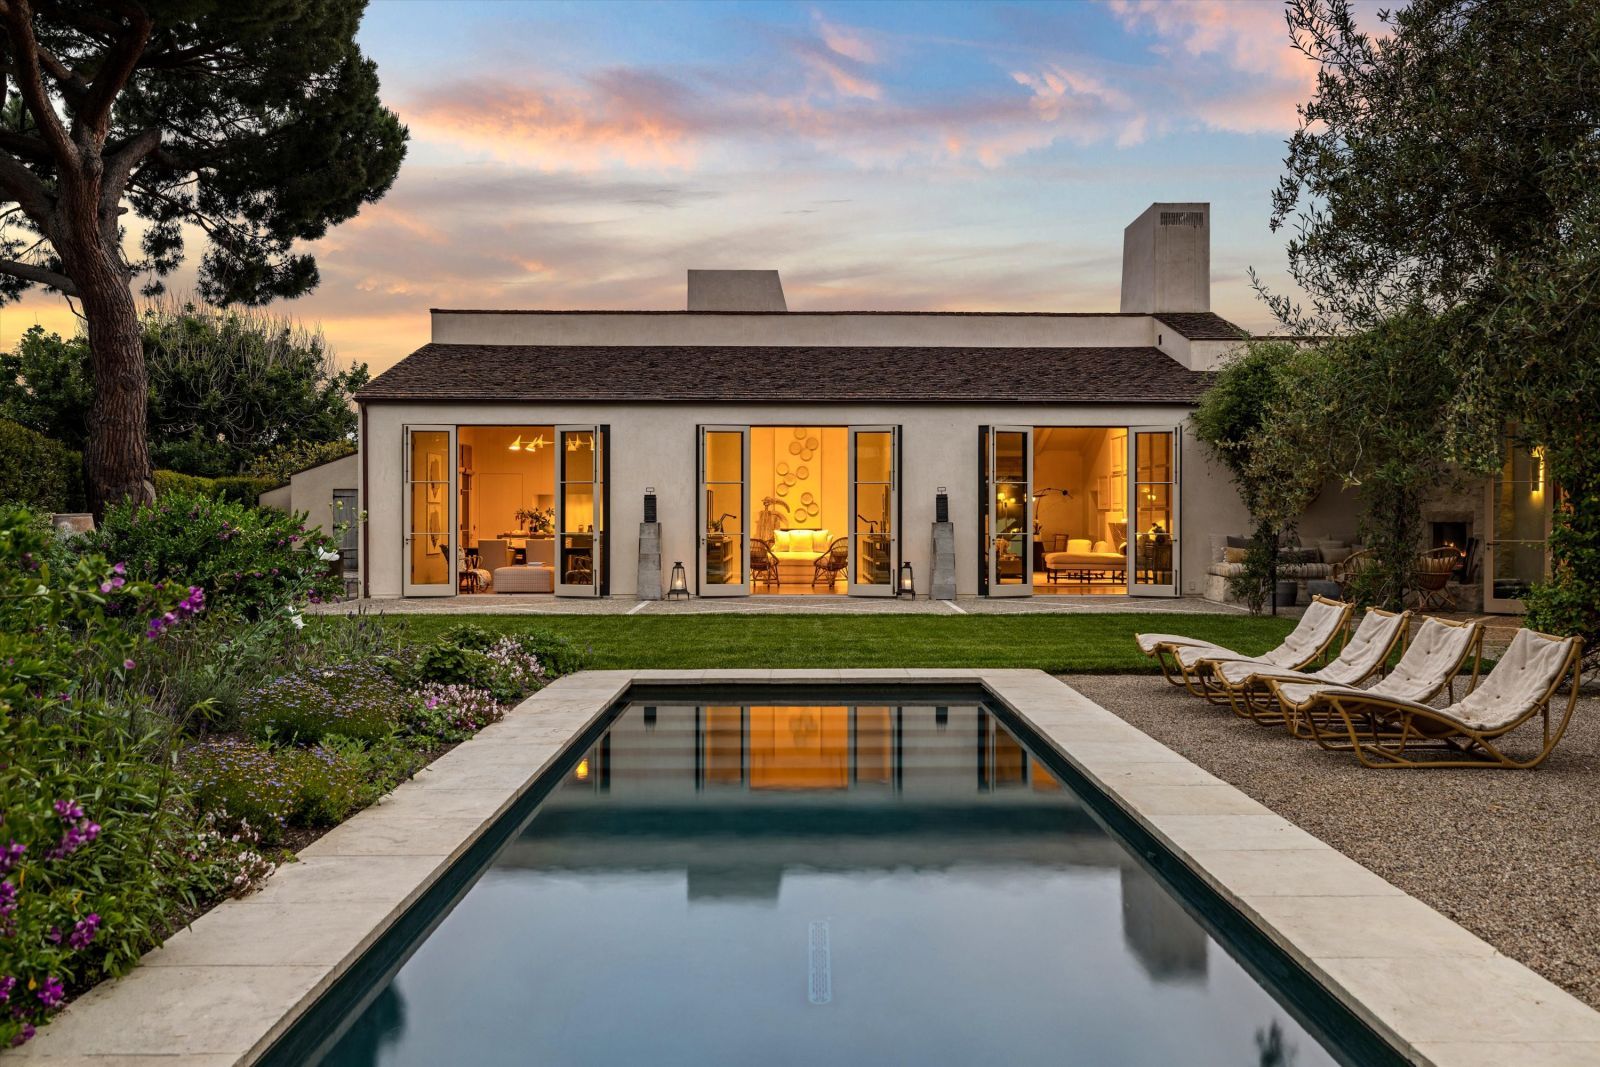 The beautiful Birnam Wood home of award-winning acclaimed interior designer Suzanne Rheinstein in Montecito with a serene pool and 3 doors illuminated from within